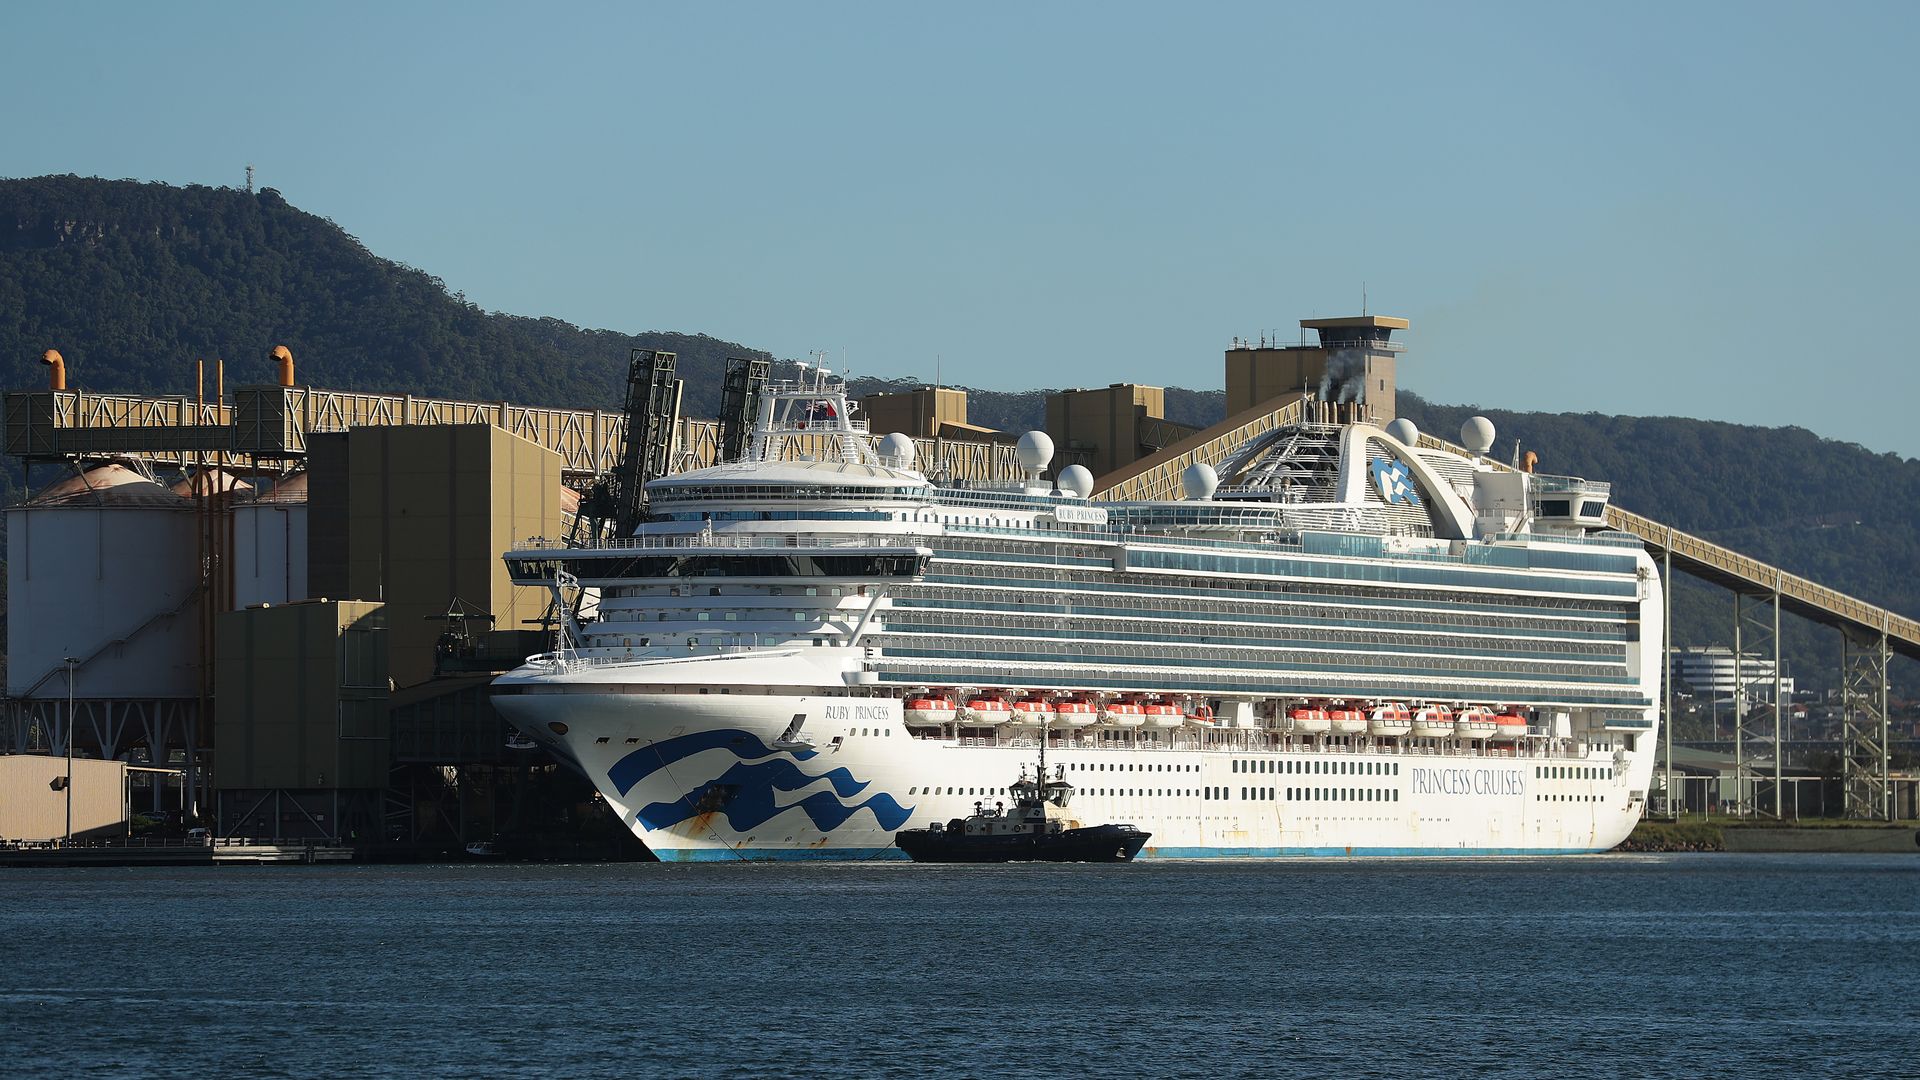 The Ruby Princess, whose passengers were allowed off the ship in Sydney on March 19, is now under police investigation